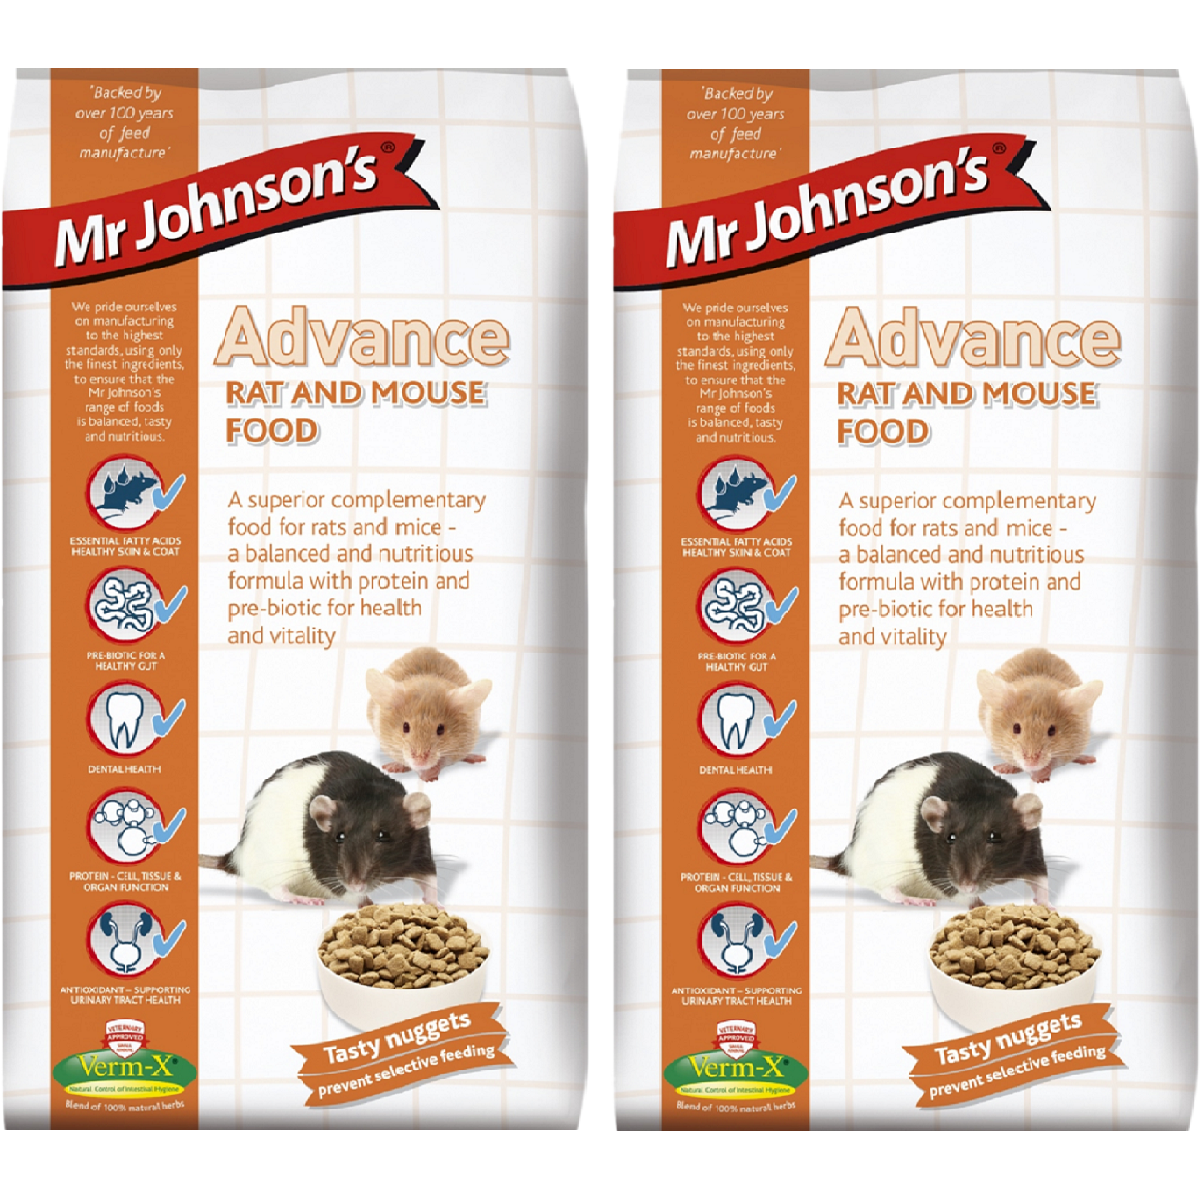 Mr Johnsons - Advance Rat and Mouse Food (750g)